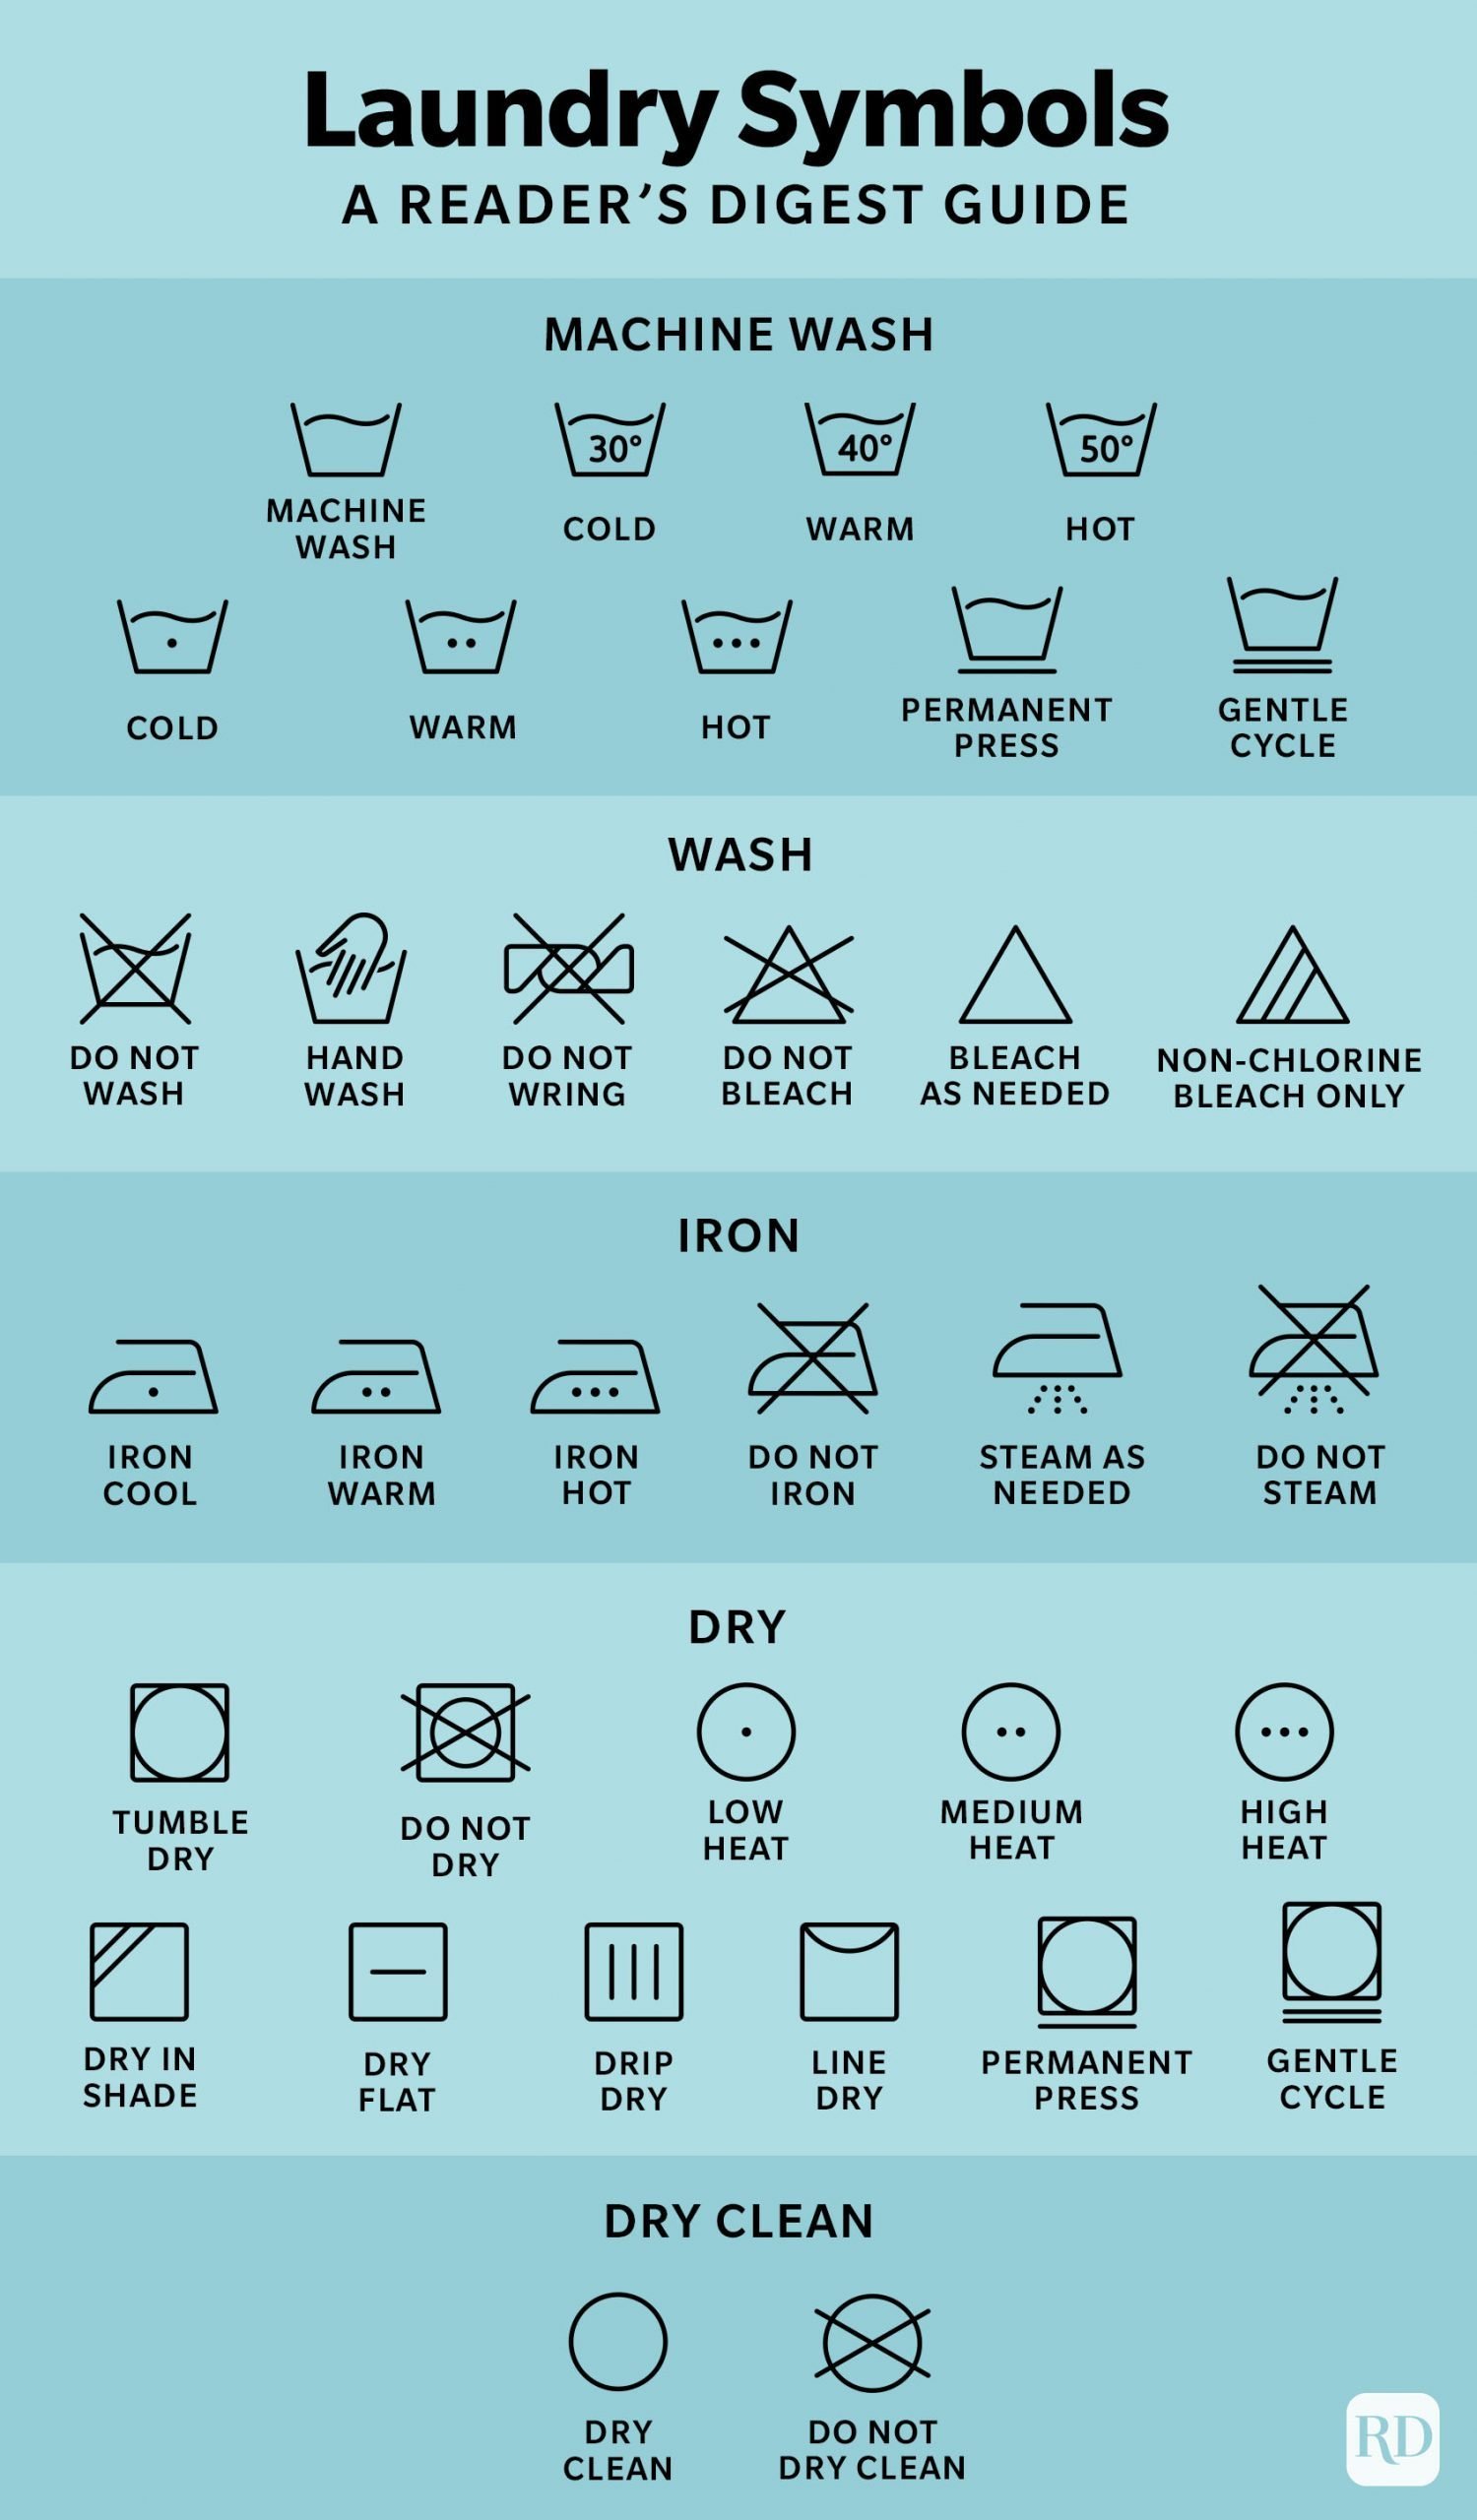 When is it Necessary to Line Dry? - Clean Laundry